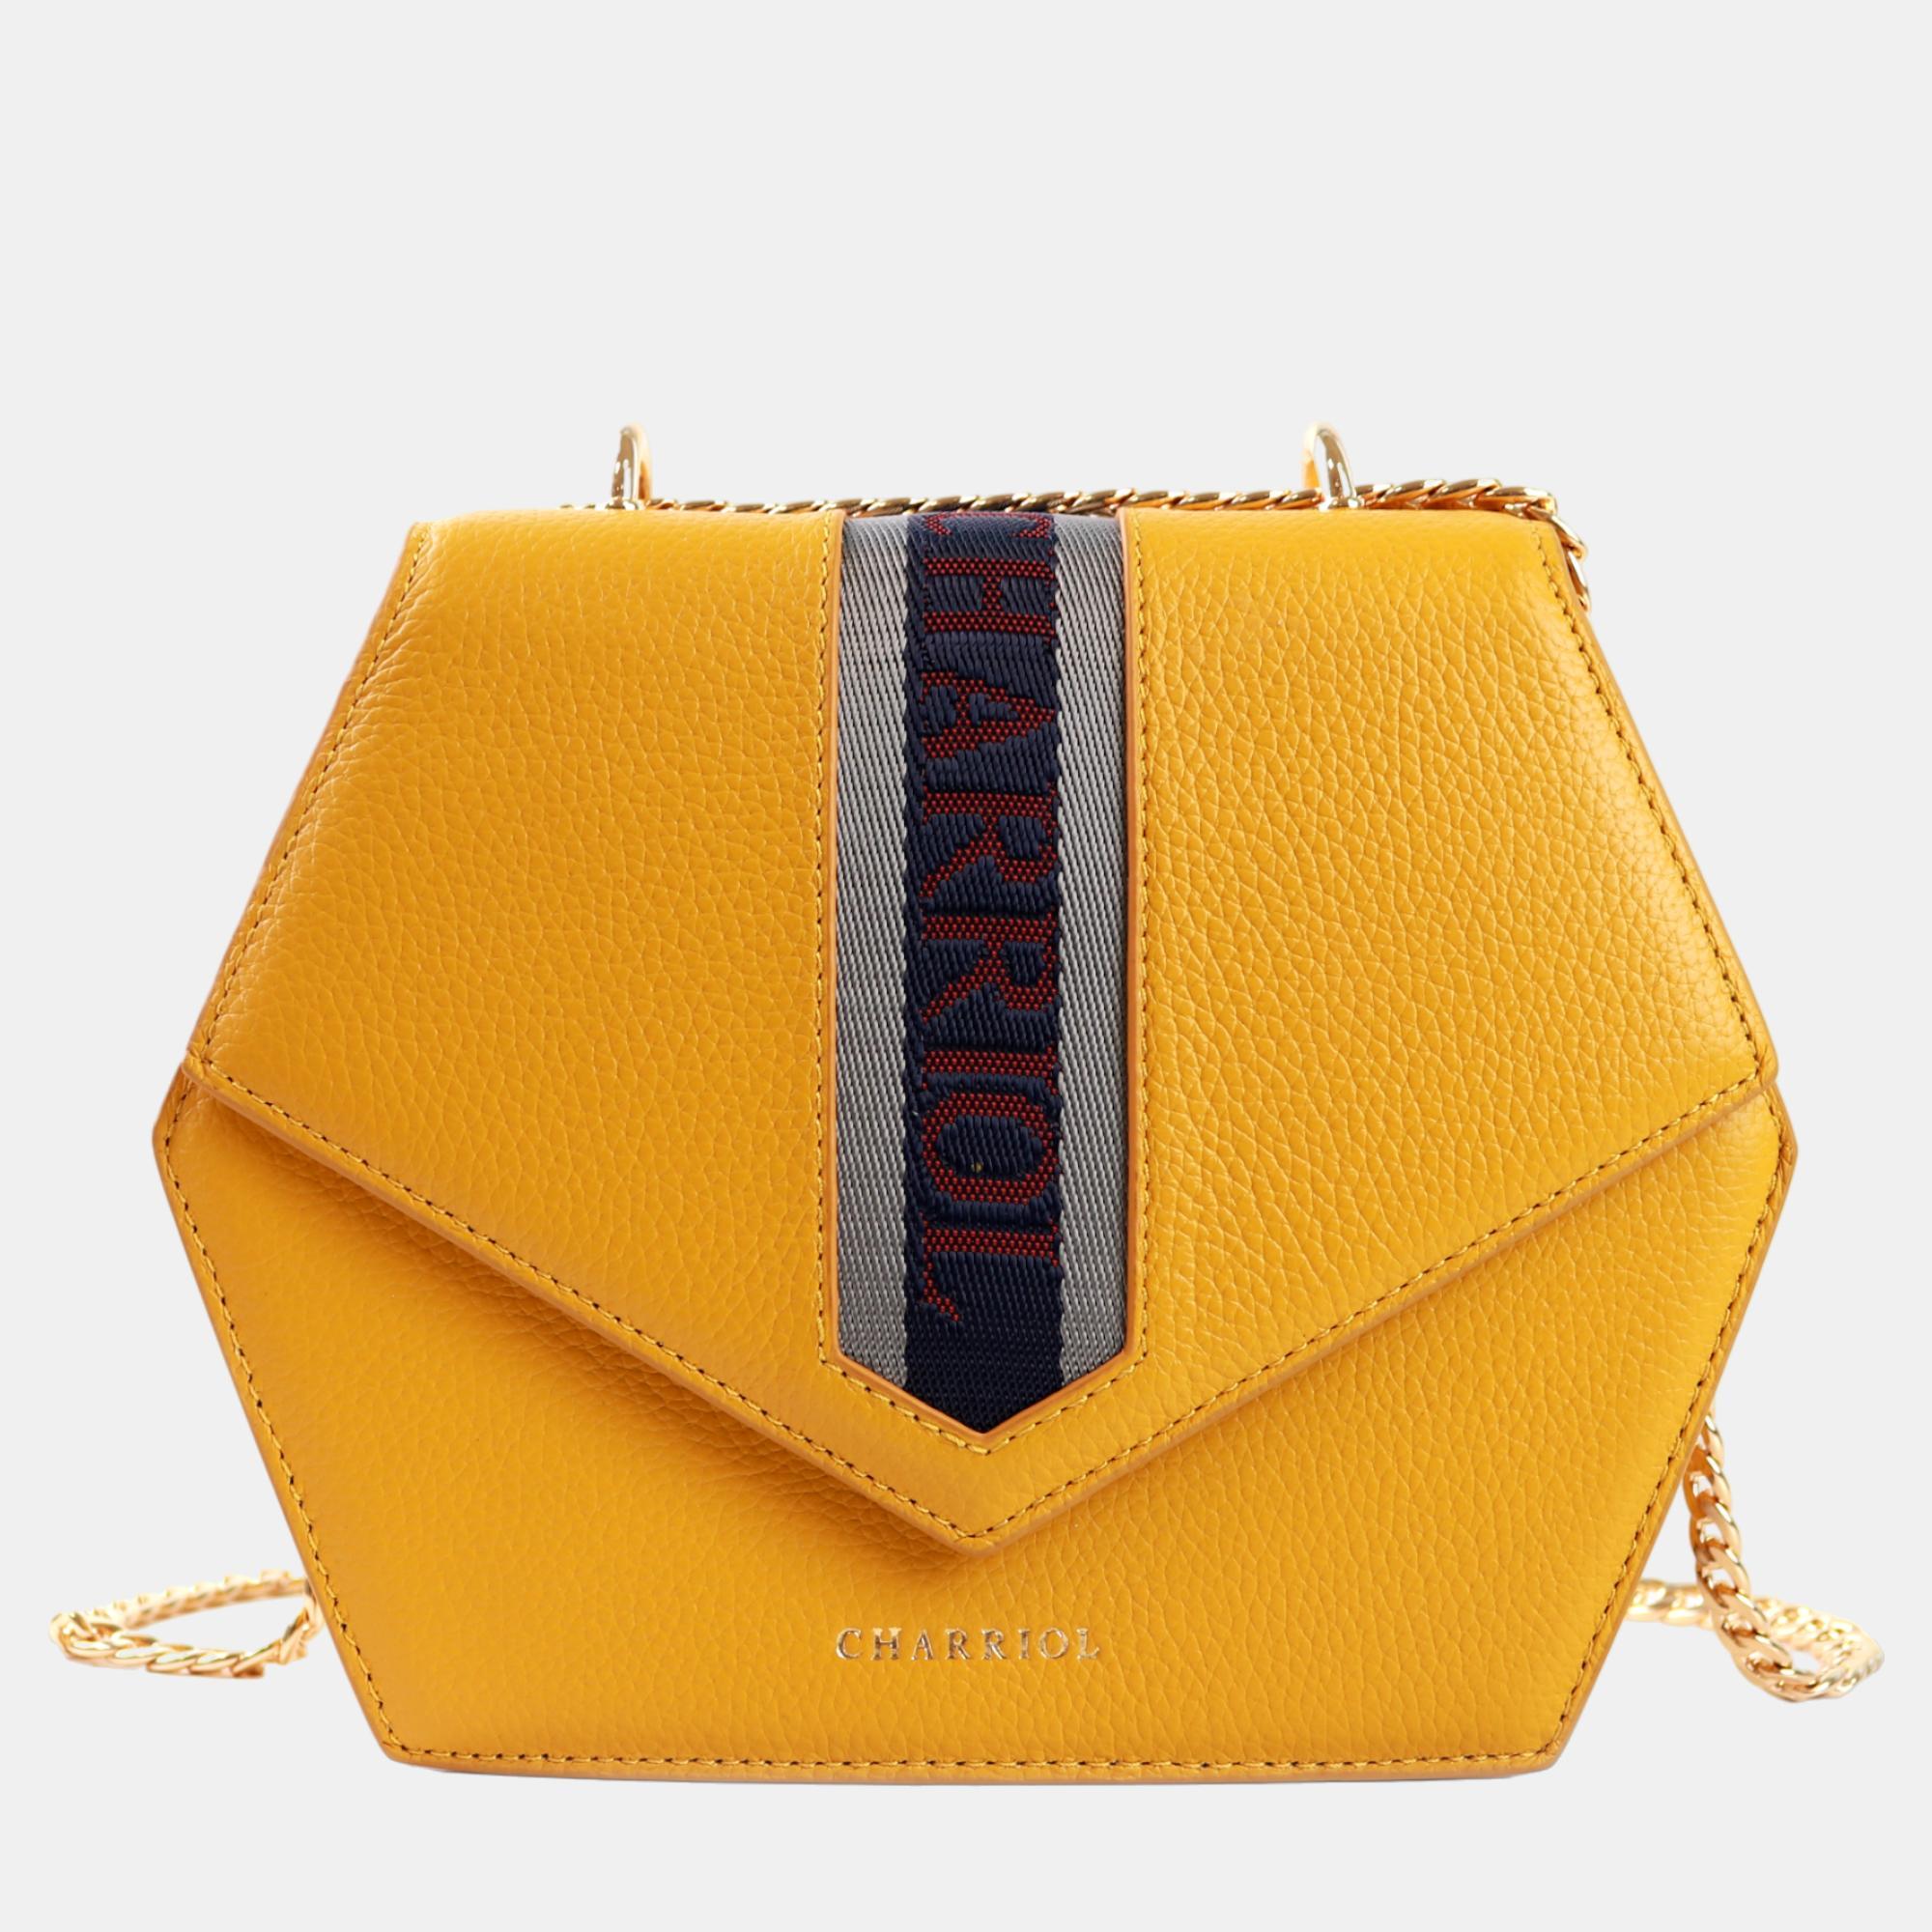 Pre-owned Charriol Yellow Leather Deauville Crossbody